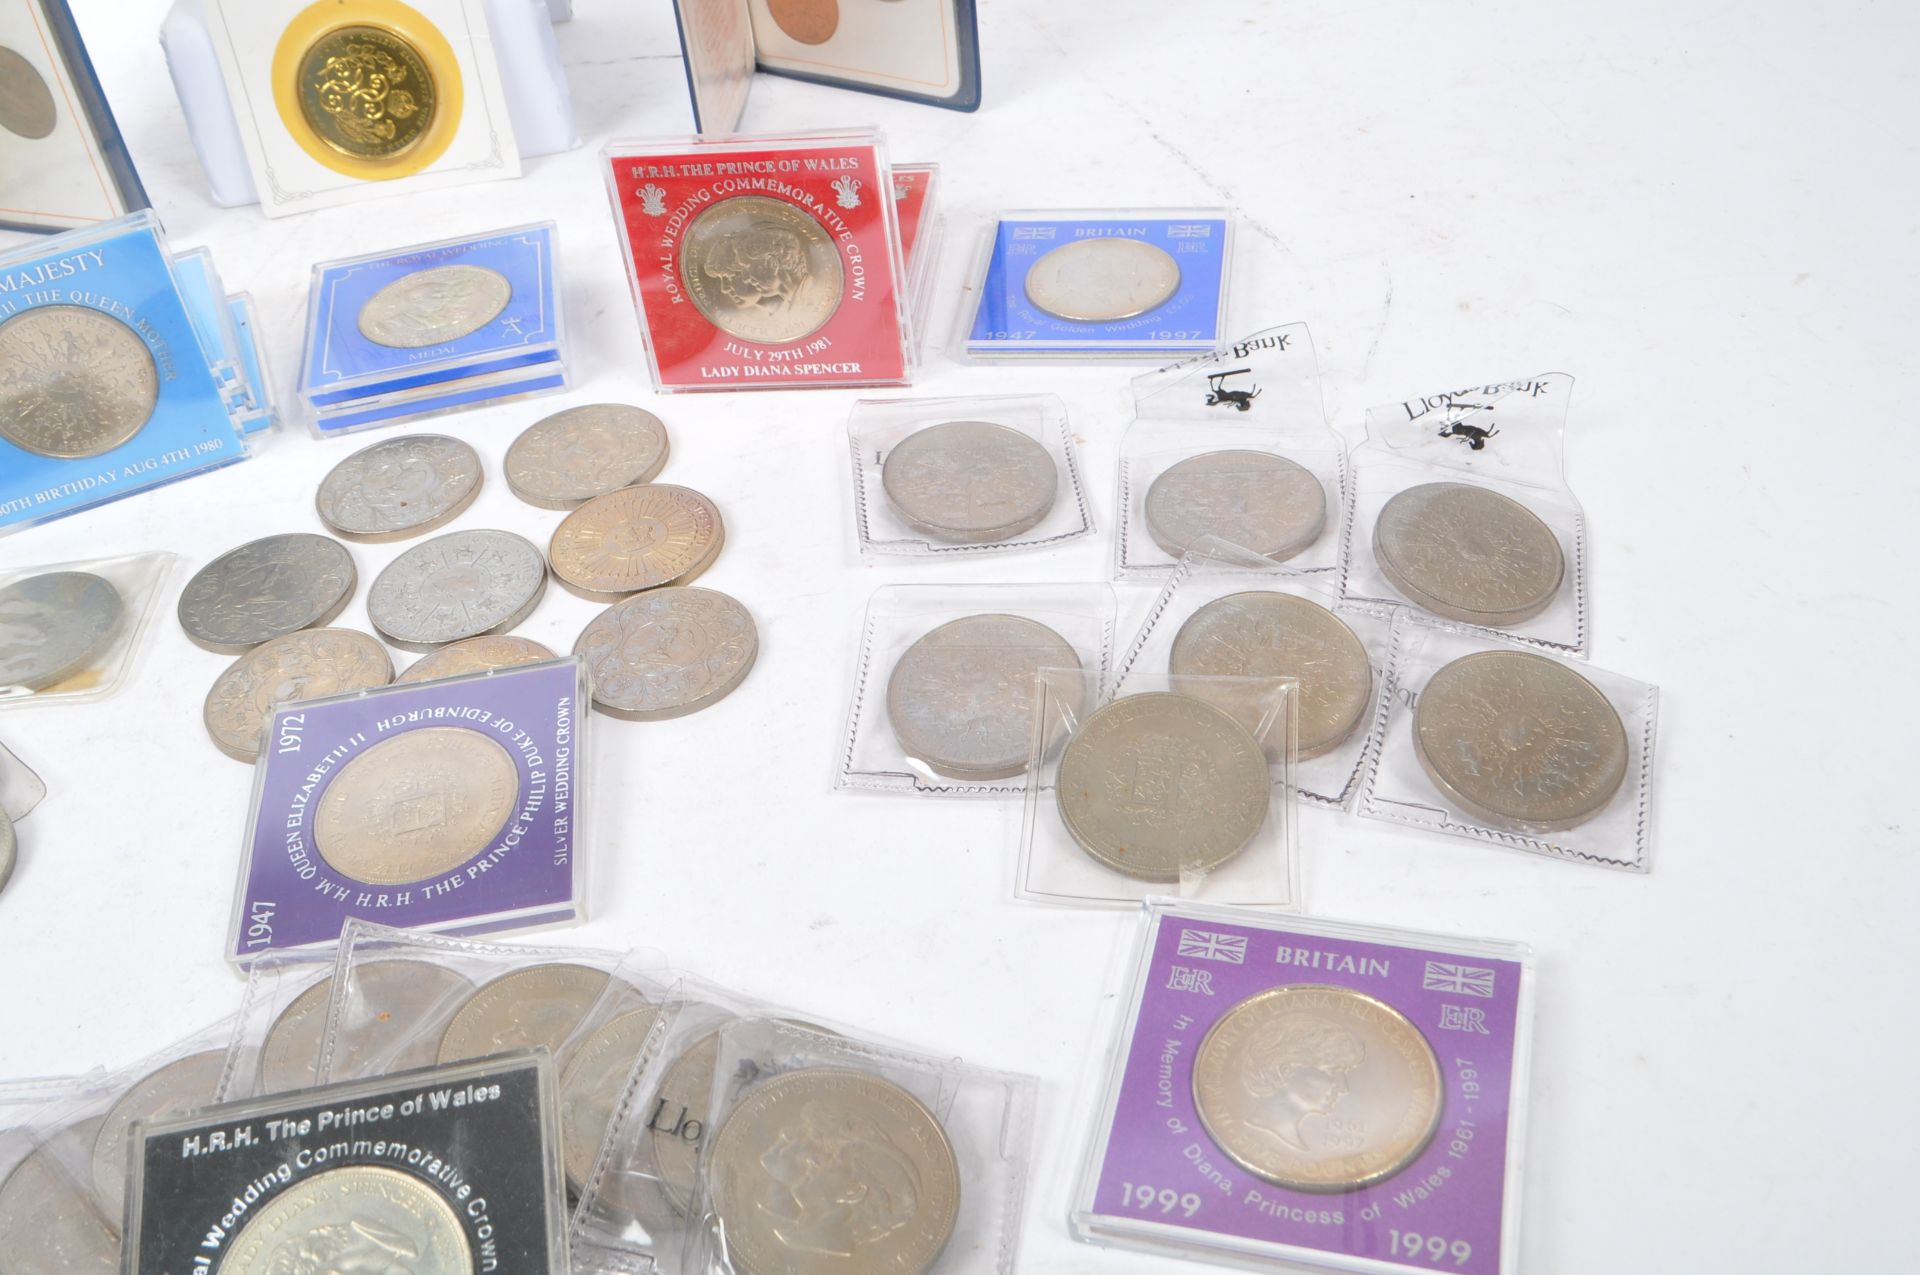 COLLECTION OF 20TH CENTURY BRITISH CURRENCY CROWN COINS - Image 4 of 7